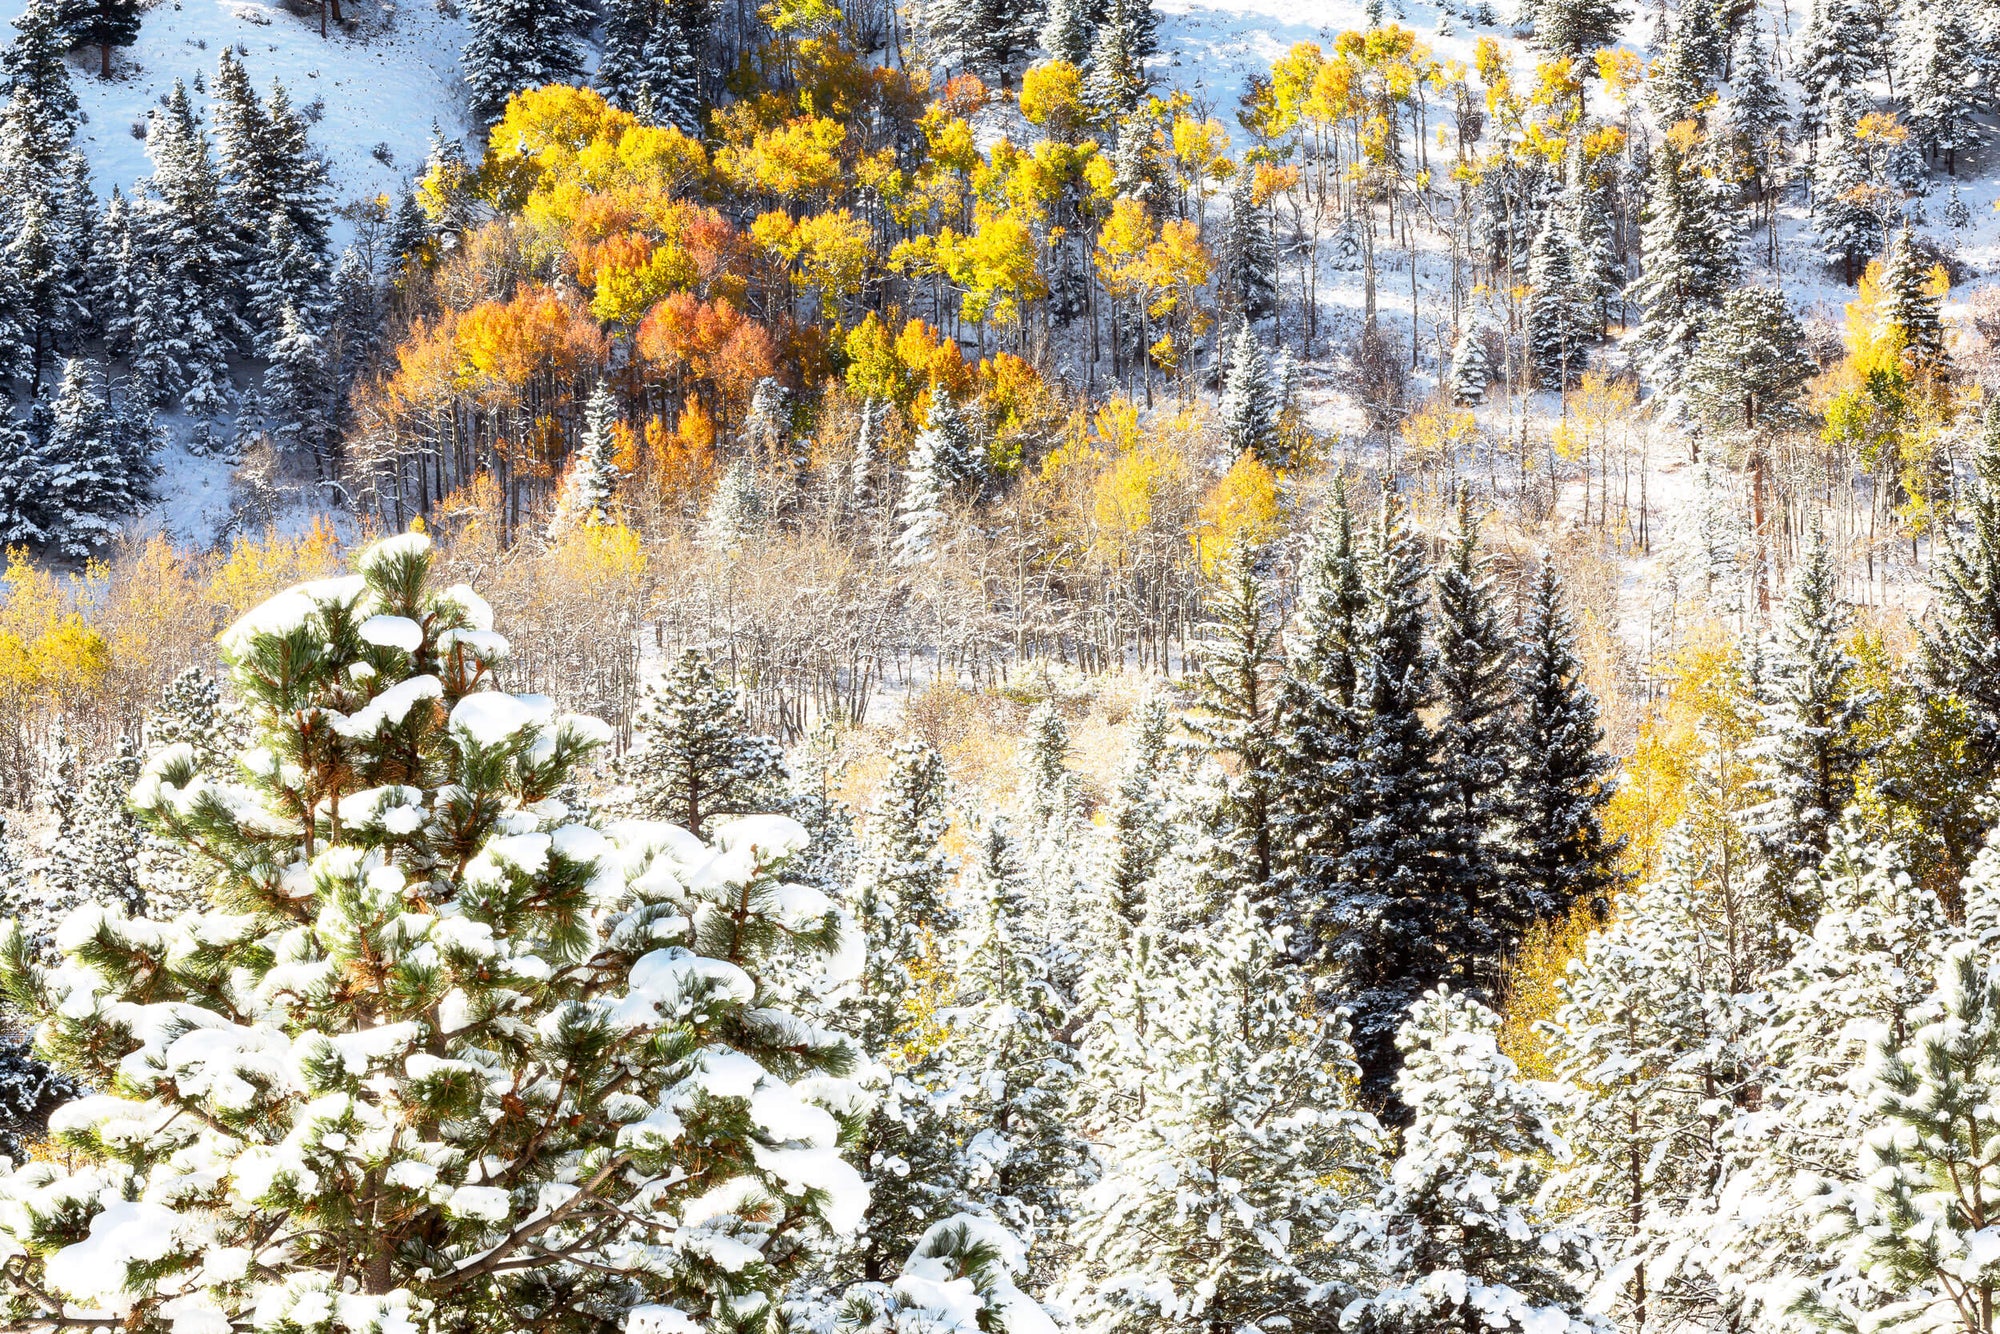 A Rocky Mountain National Park picture shows yellow aspen trees after snow in fall.